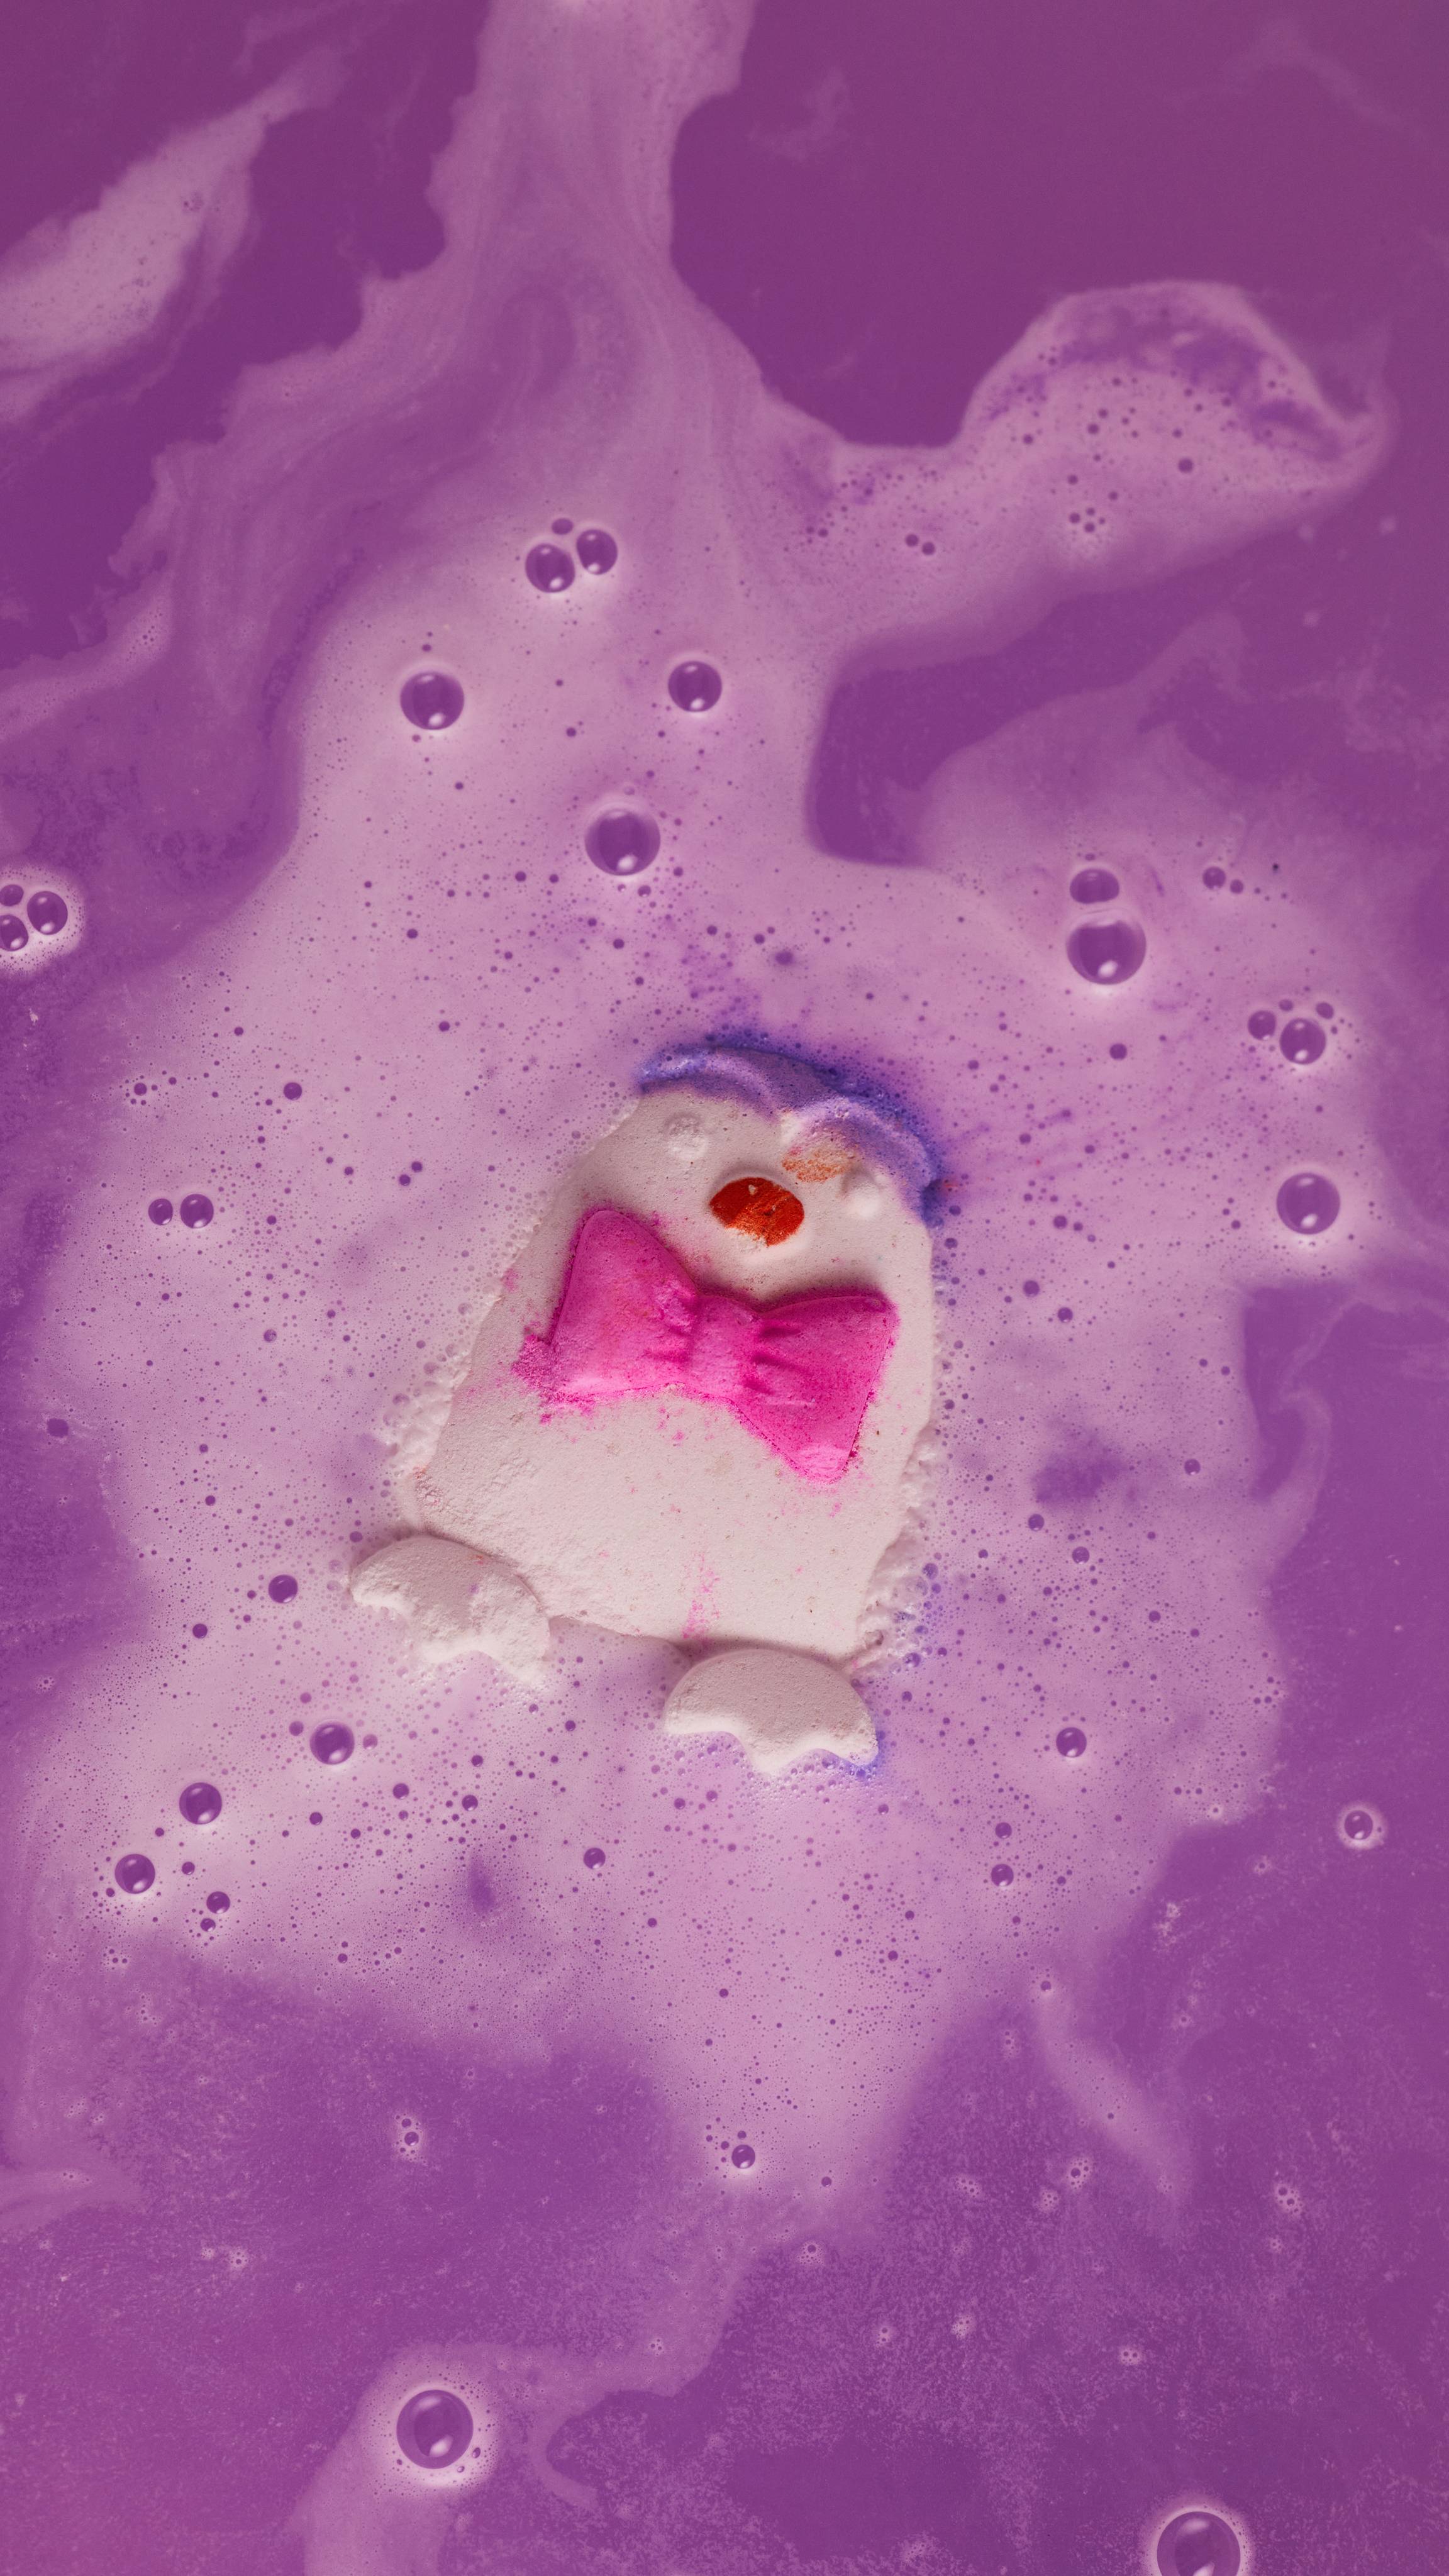 Penguin bath bomb begins to fizz away in the bath water giving off twirls of lavender coloured foam.